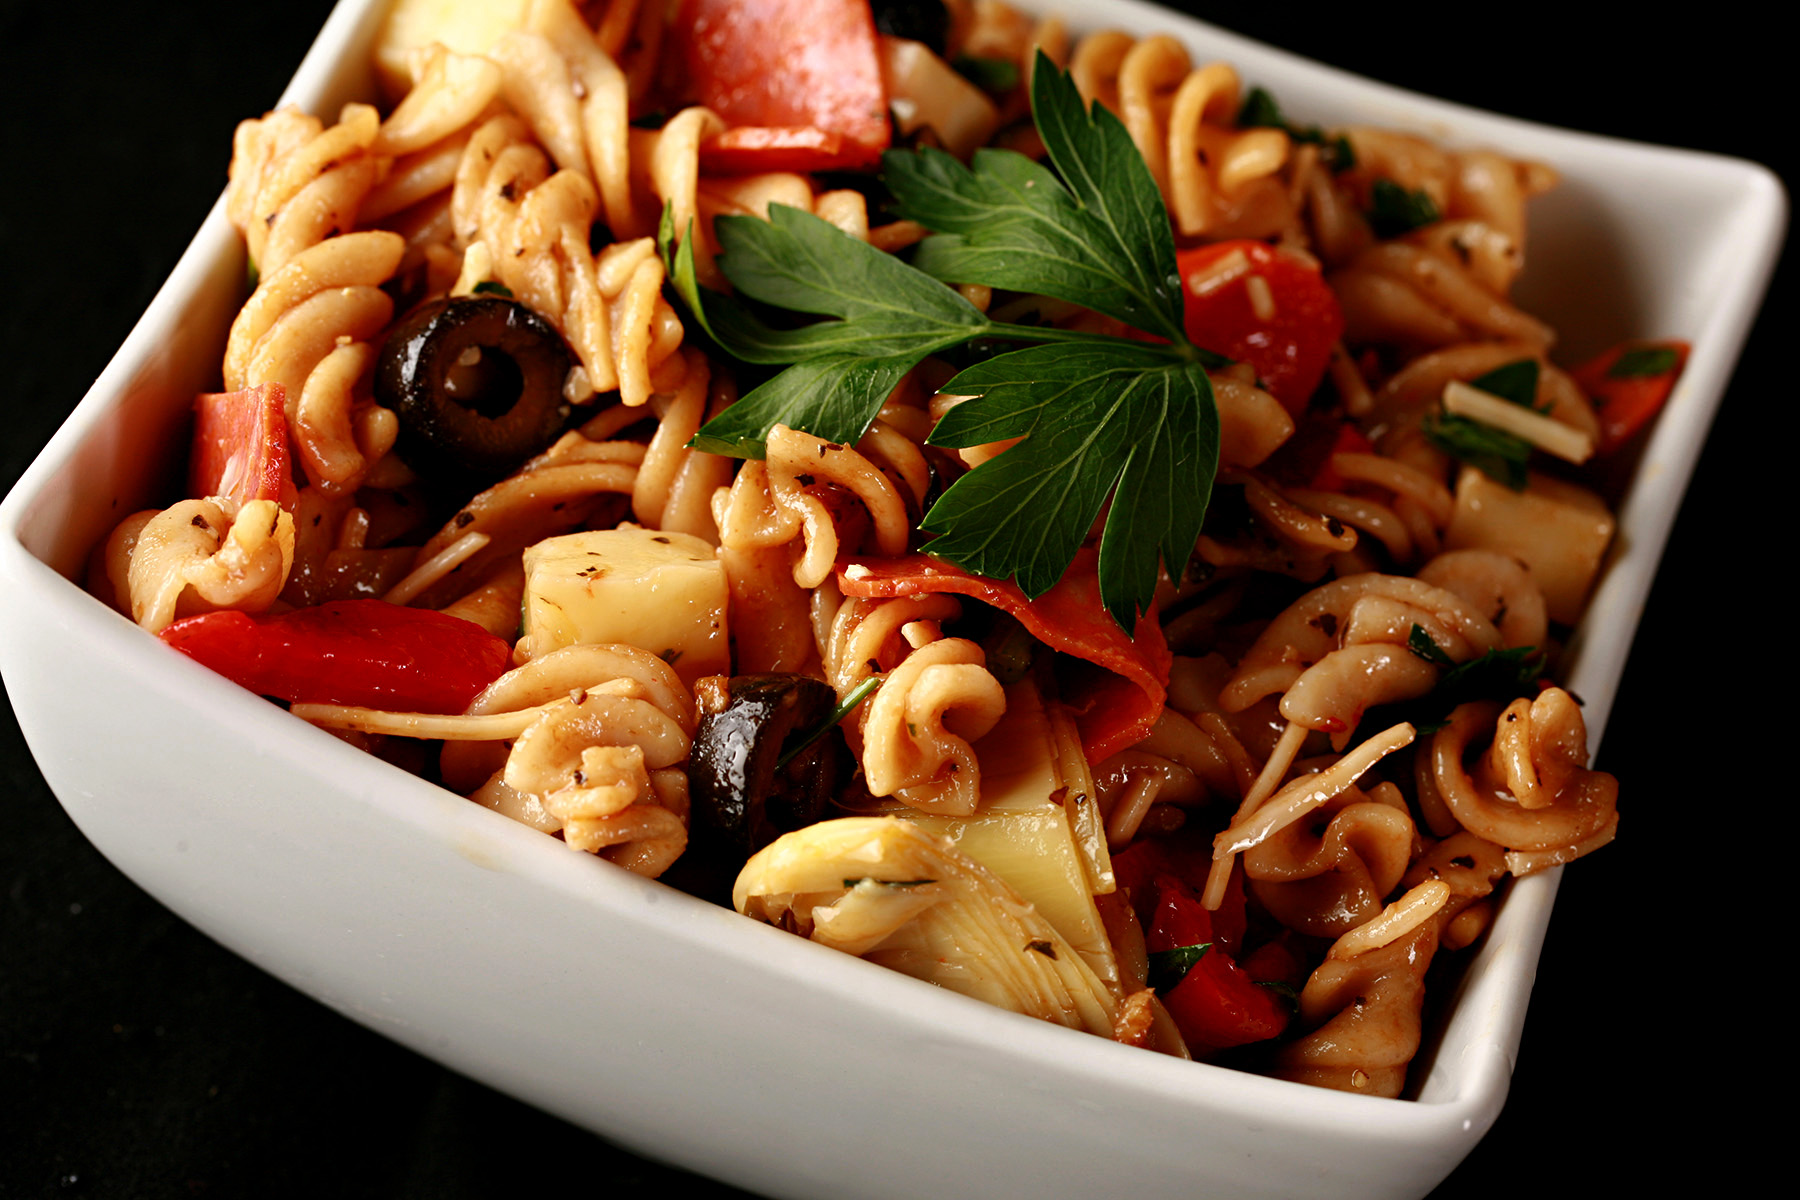 A rich looking pasta salad in a white bowl. Spiral noodles are shown lgthly coated in a thin red sauce, with pepperoni, artichoked, black olives, cheese,  and parsley visible.